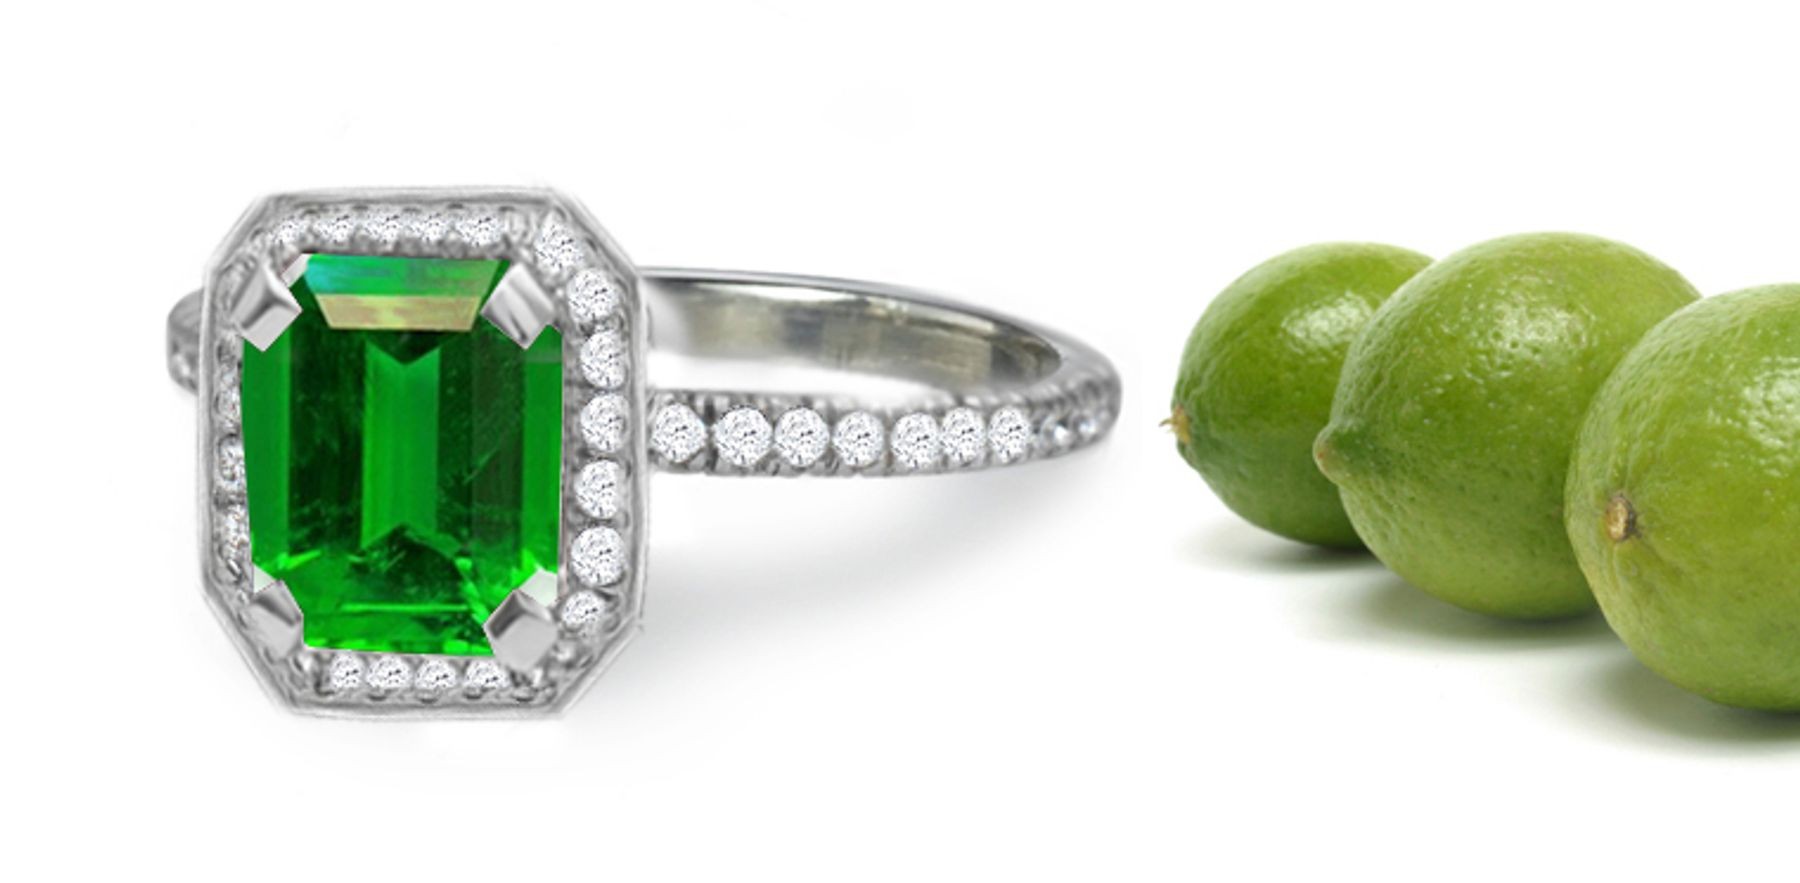 This Gold & Long Lines of Emerald Cut Emerald & Round Diamond Halo Emit Radiance Brilliantly